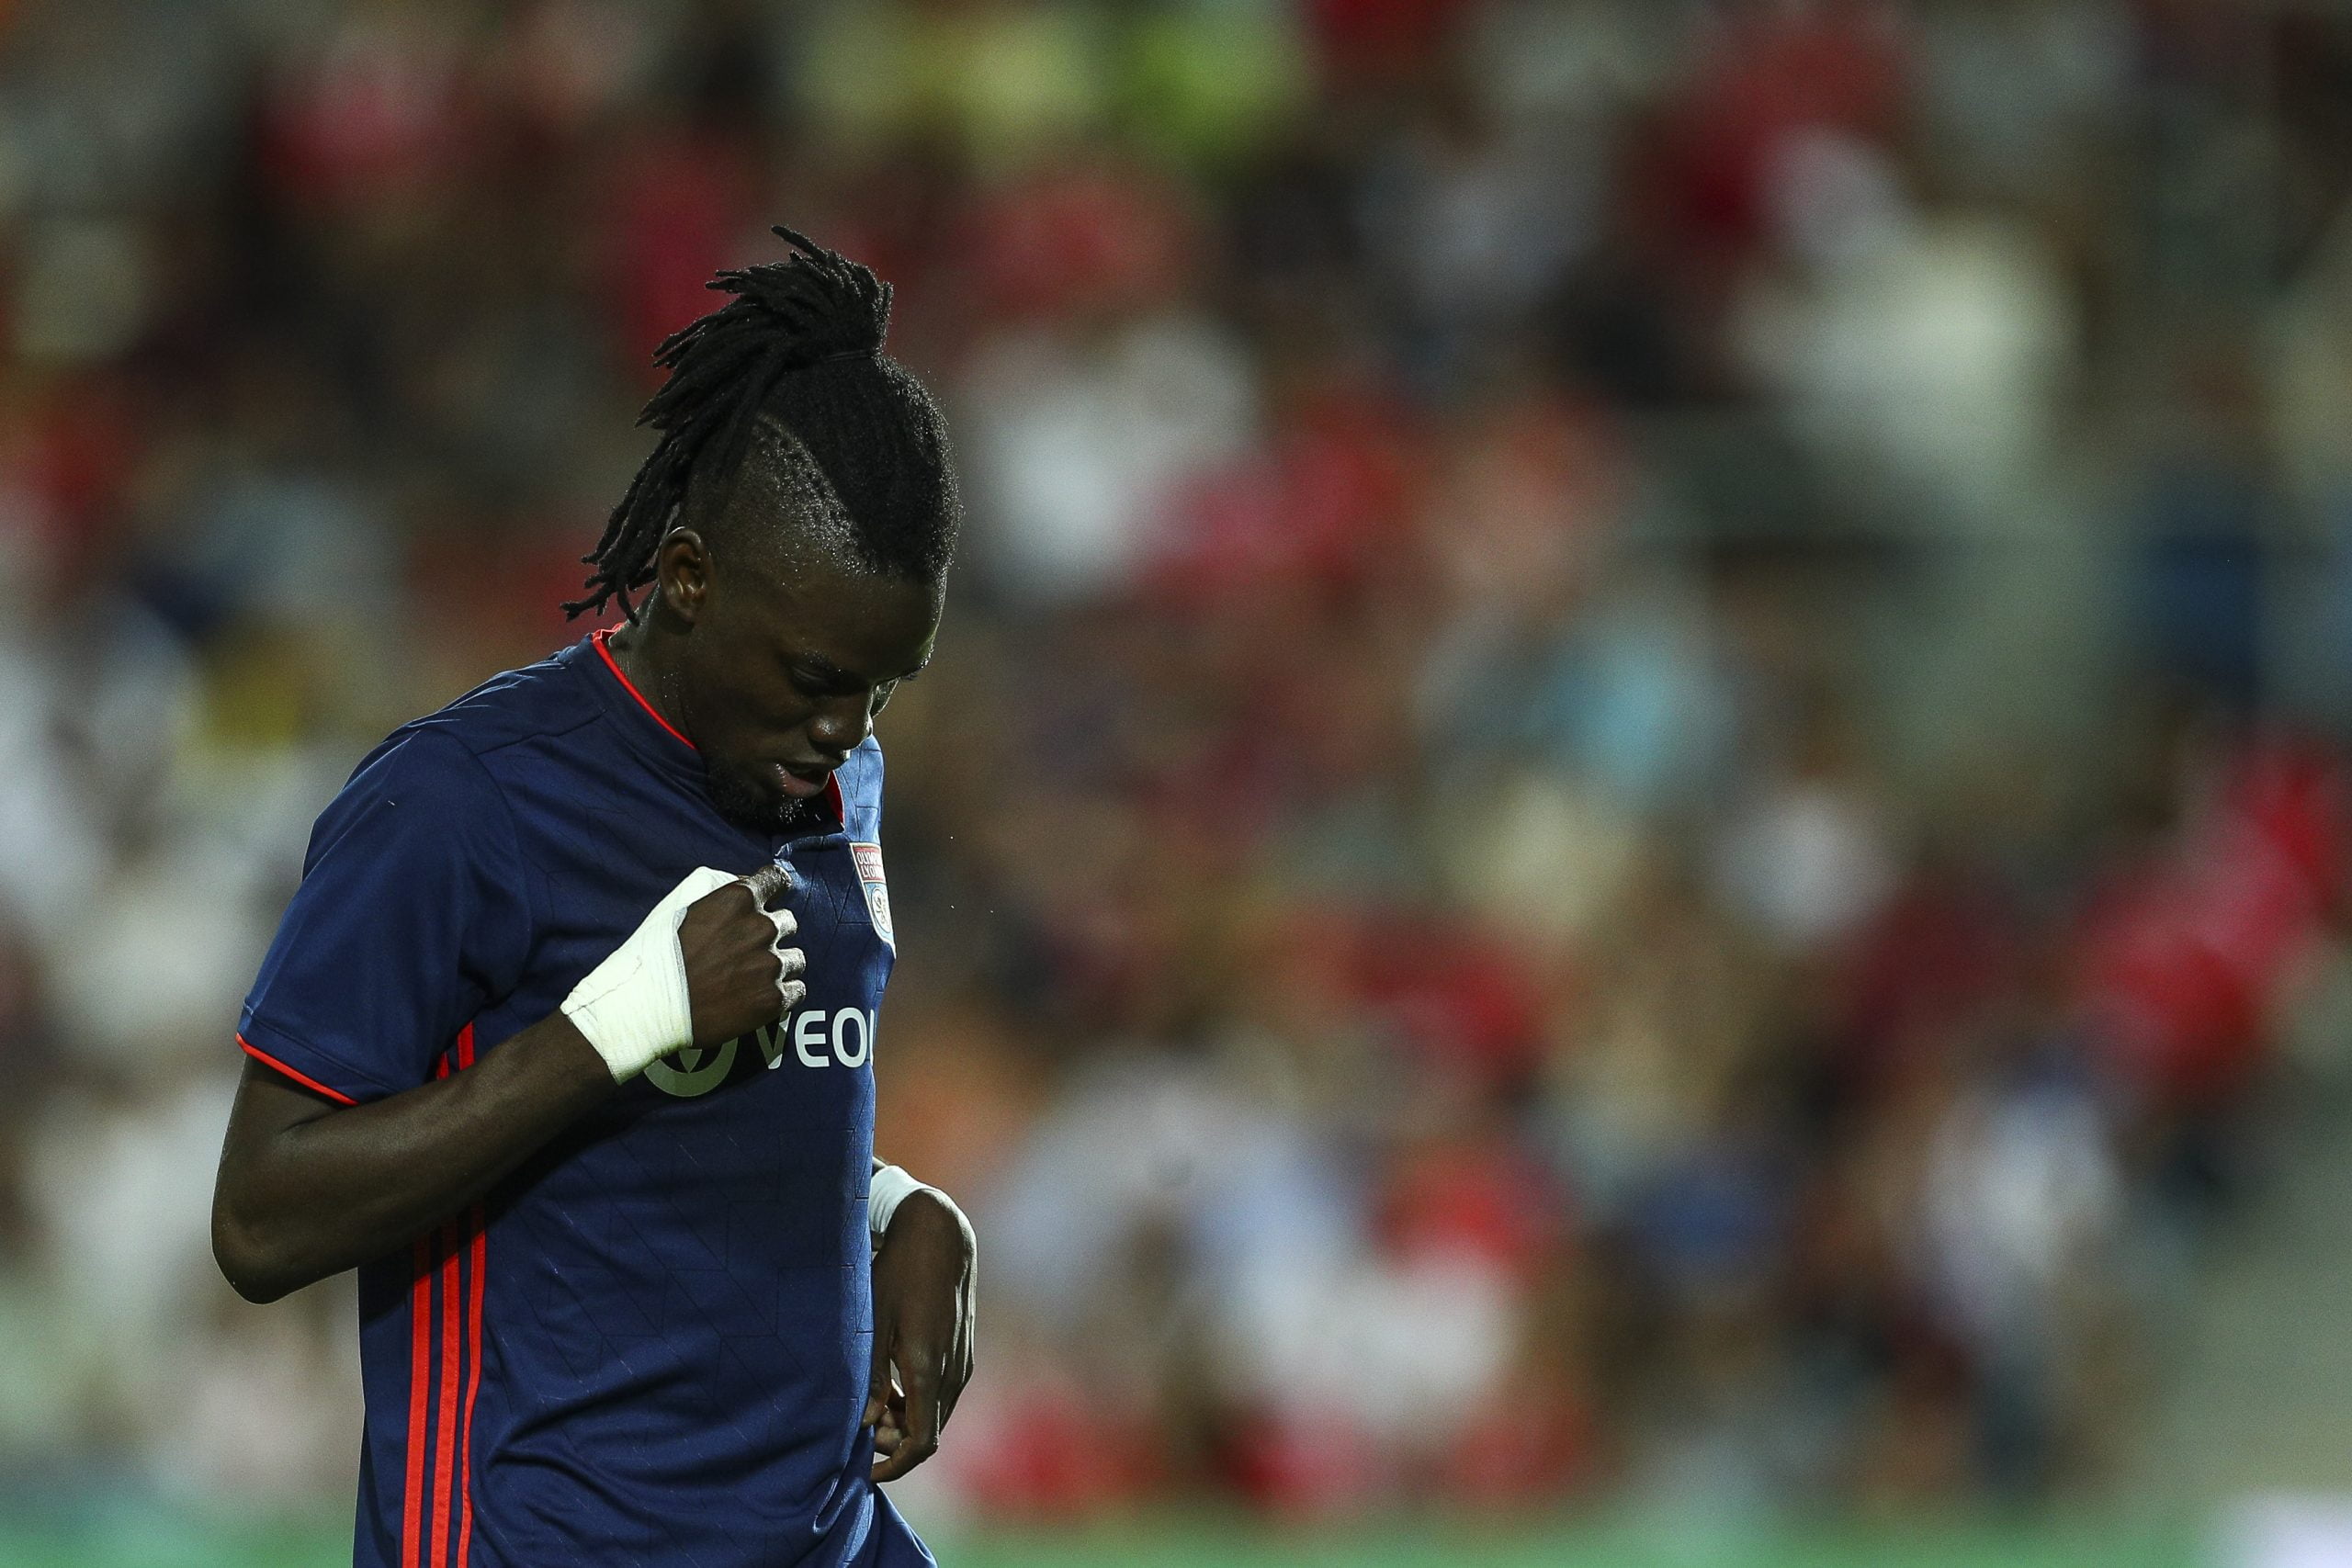 FARO, PORTUGAL - AUGUST 01: Bertrand Traore from Lyon celebrates scoring second goal during the match between SL Benfica v Lyon for the  International Champions Cup - Eusebio Cup 2018 at Estadio do Algarve on August 1, 2018 in Faro, Portugal. (Photo by Carlos Rodrigues/Getty Images)